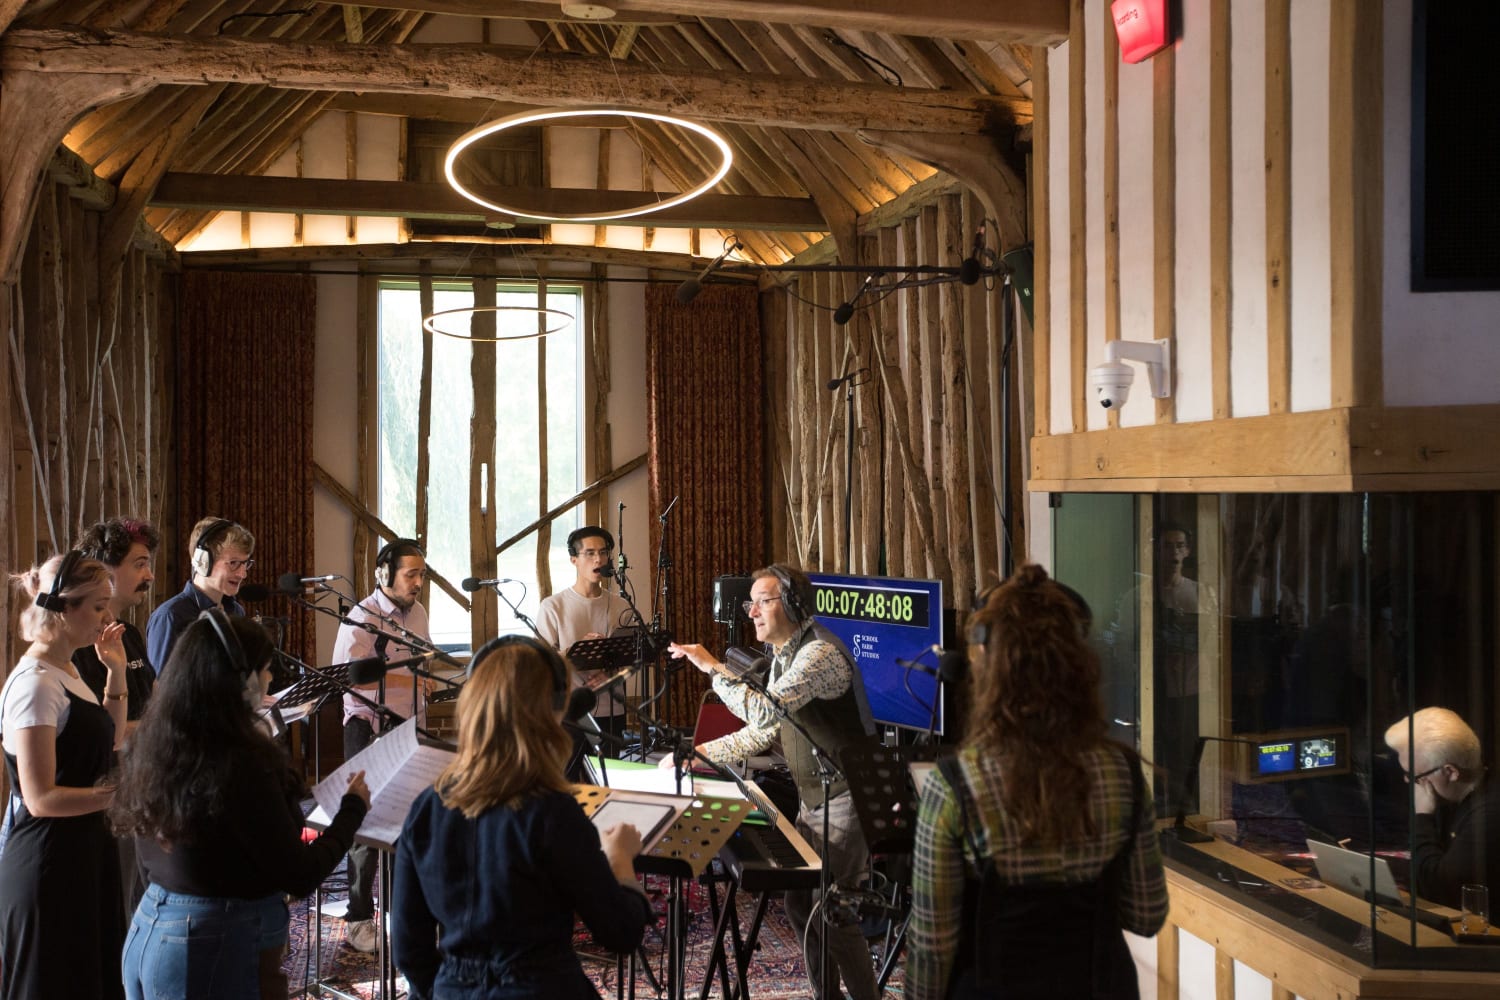 Group of 8 singers and Ben Parry recording in a barn-style recording studio with exposed beams